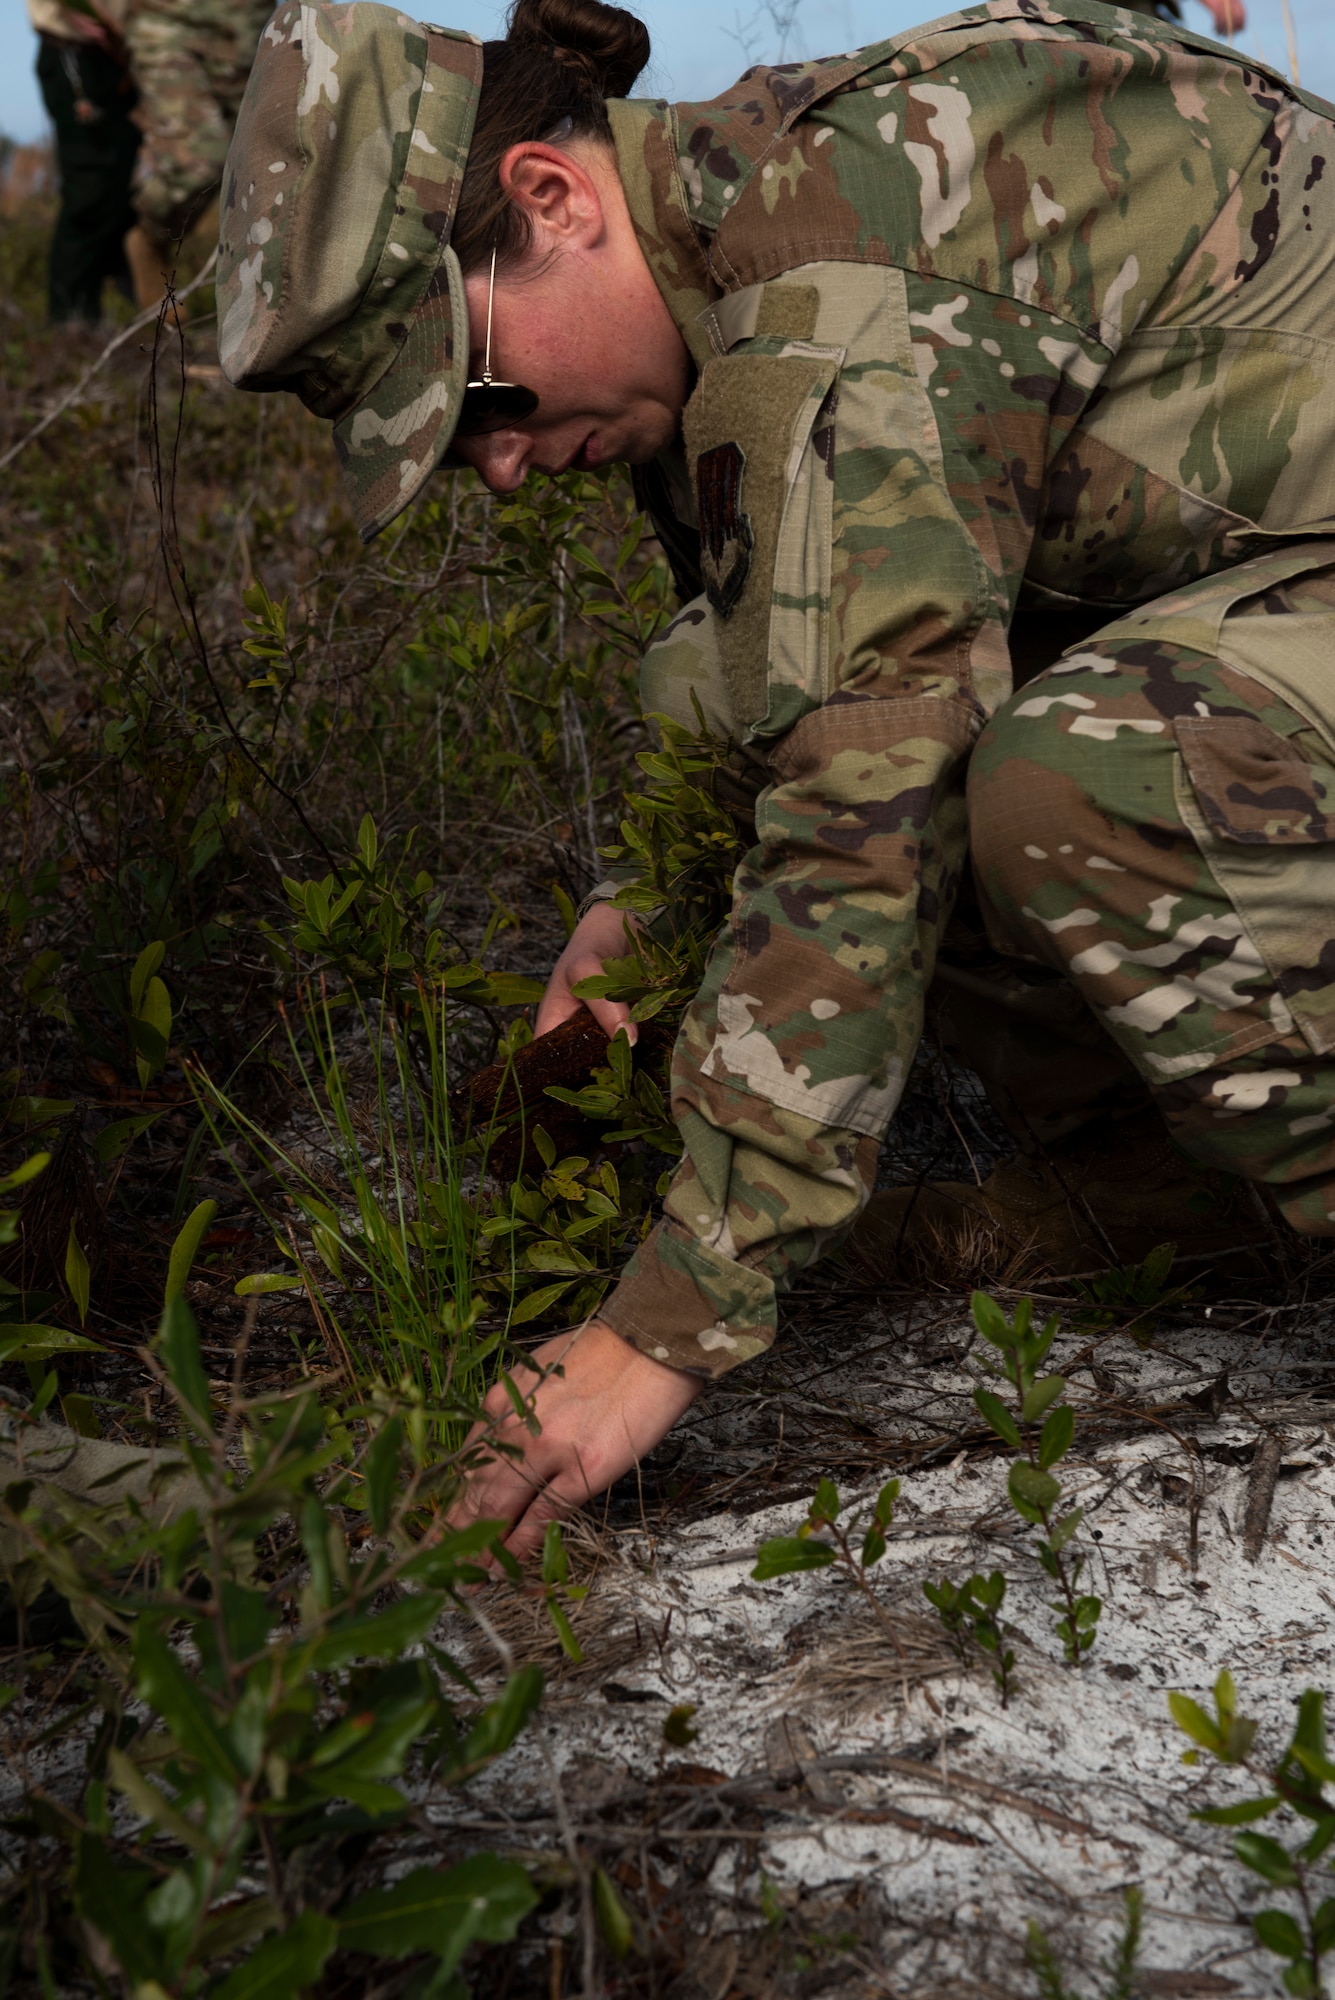 U.S. Air Force 2nd. Lt. Kristina Johnson, 325th Civil Engineer Squadron unit program development officer, plants a longleaf pine tree at Tyndall Air Force Base, Florida, Jan. 15, 2020. The 325th CES, and Department of Defense partners, had cleared 7,500 acres of Tyndall’s land of forest debris, some of which will be used to plant longleaf pine trees to restore the ecosystem. (U.S. Air Force photo by Staff Sgt. Magen M. Reeves)